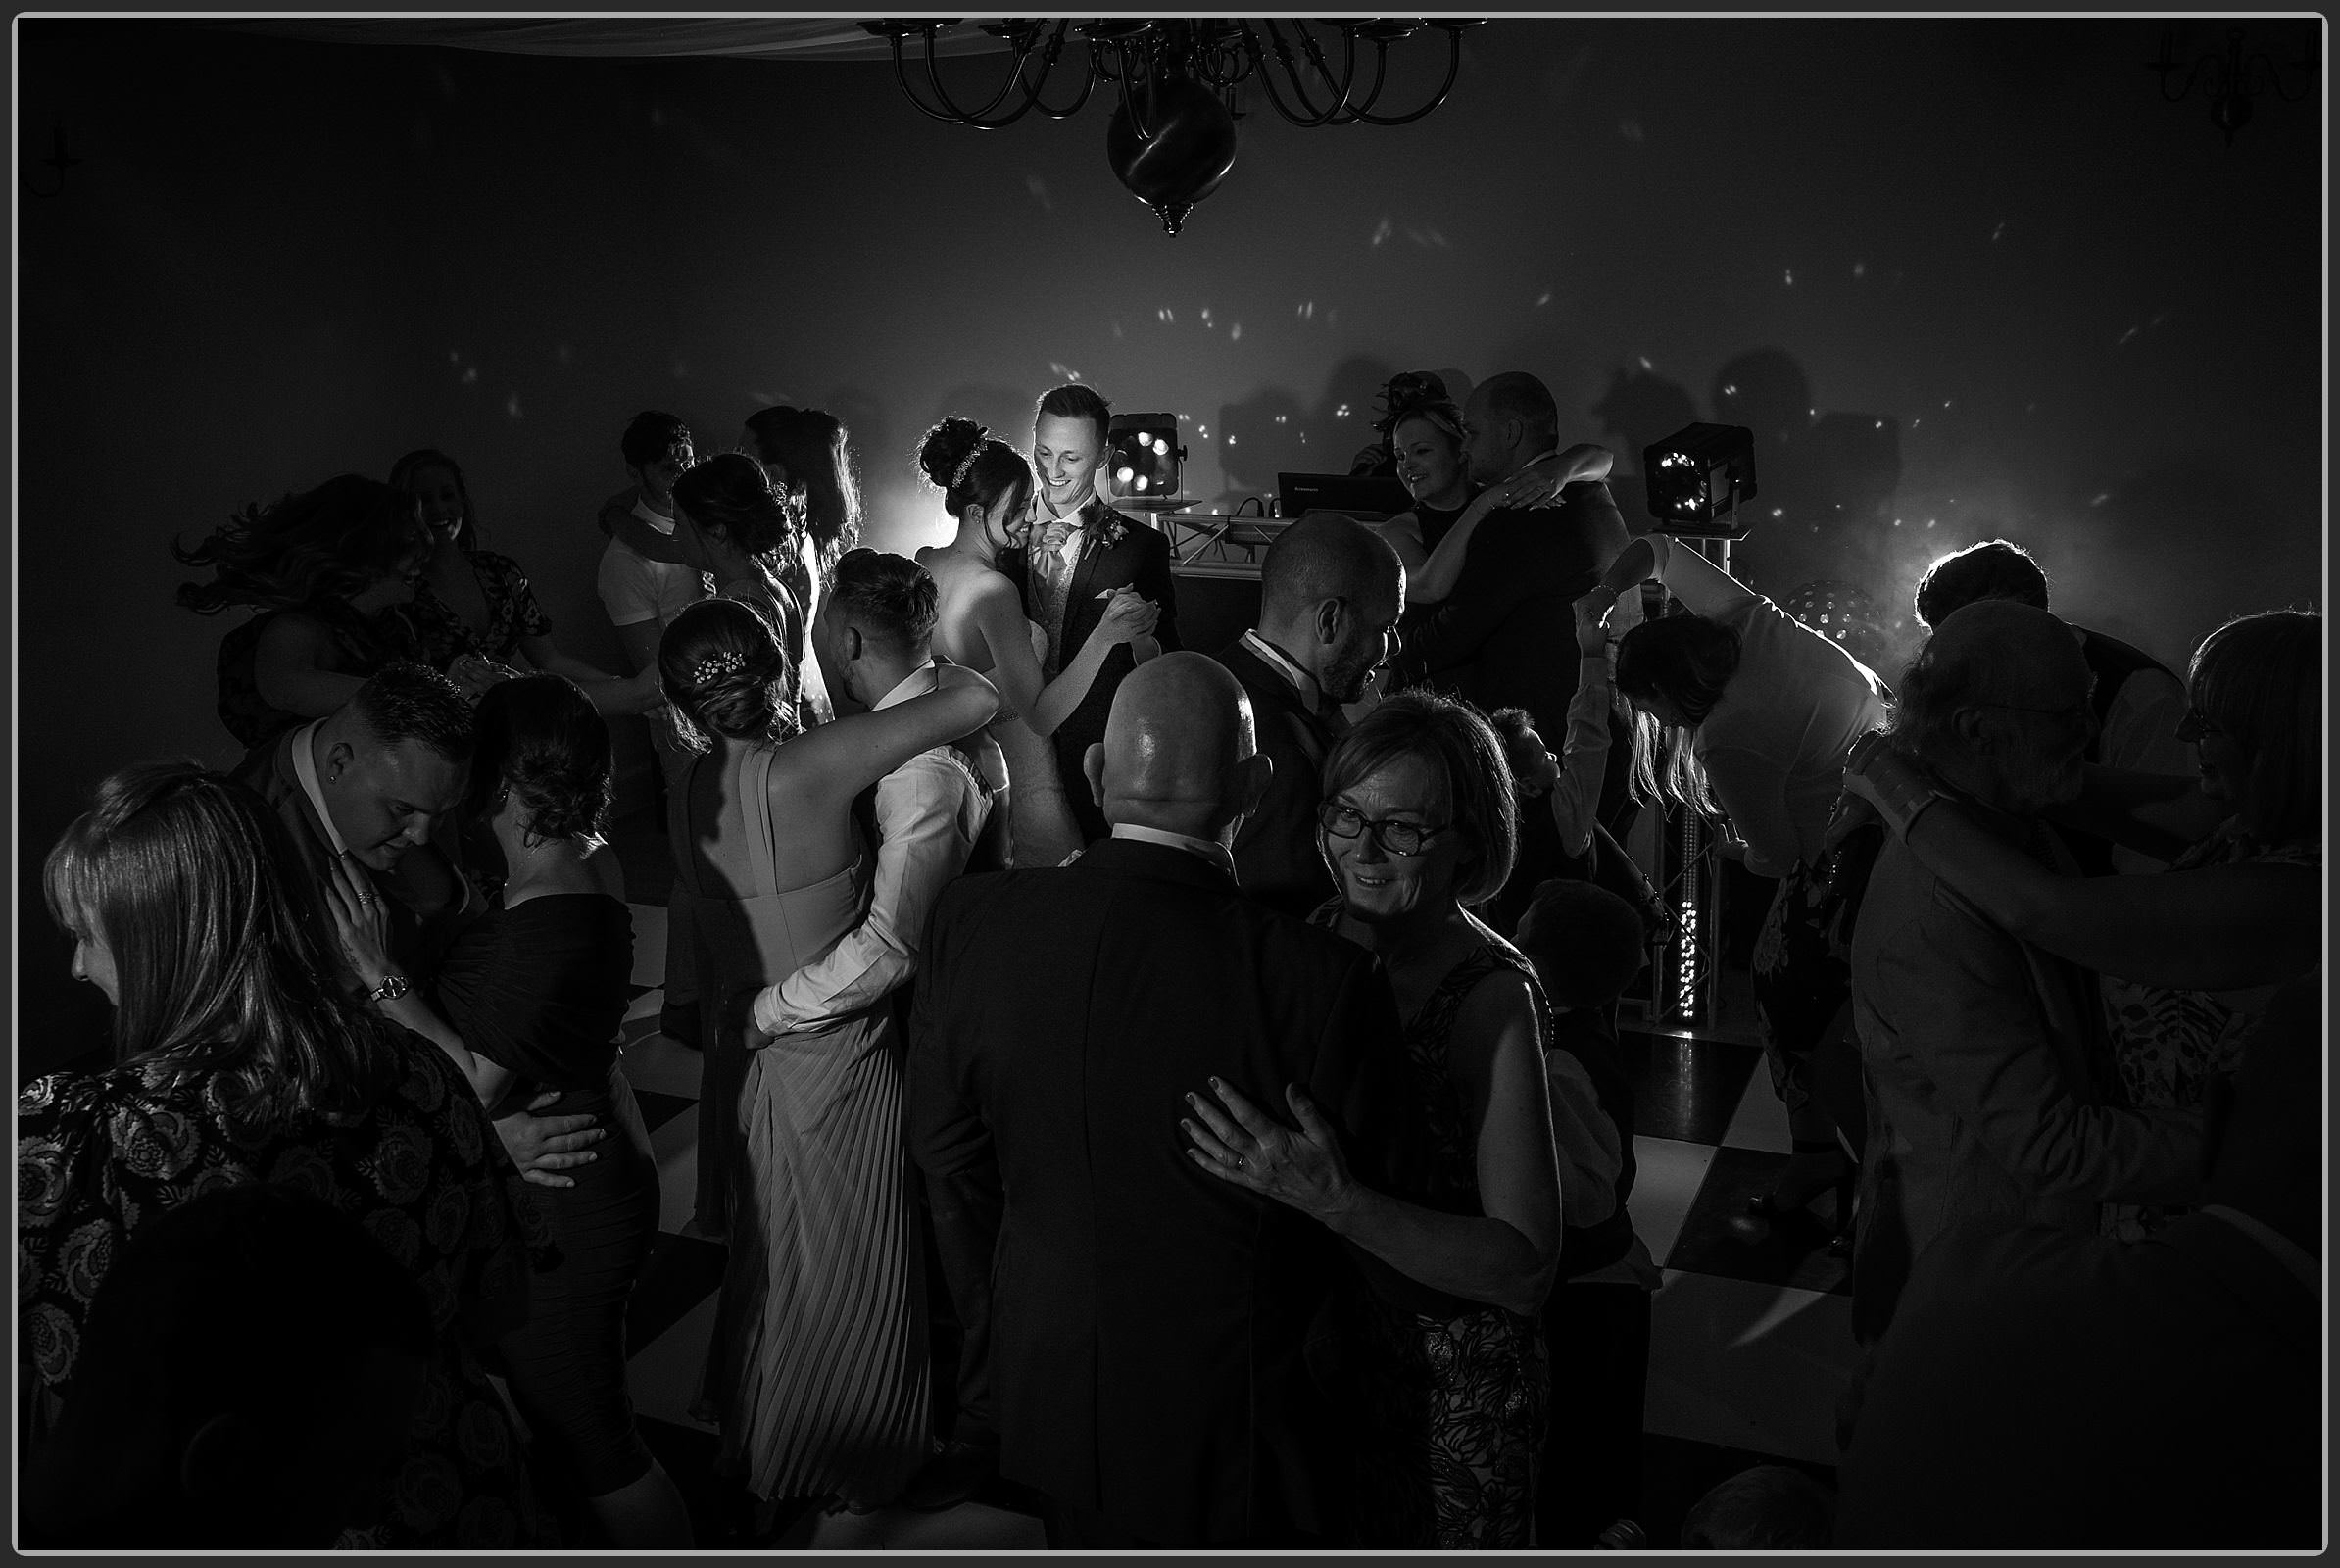 The Bride and Grooms first dance